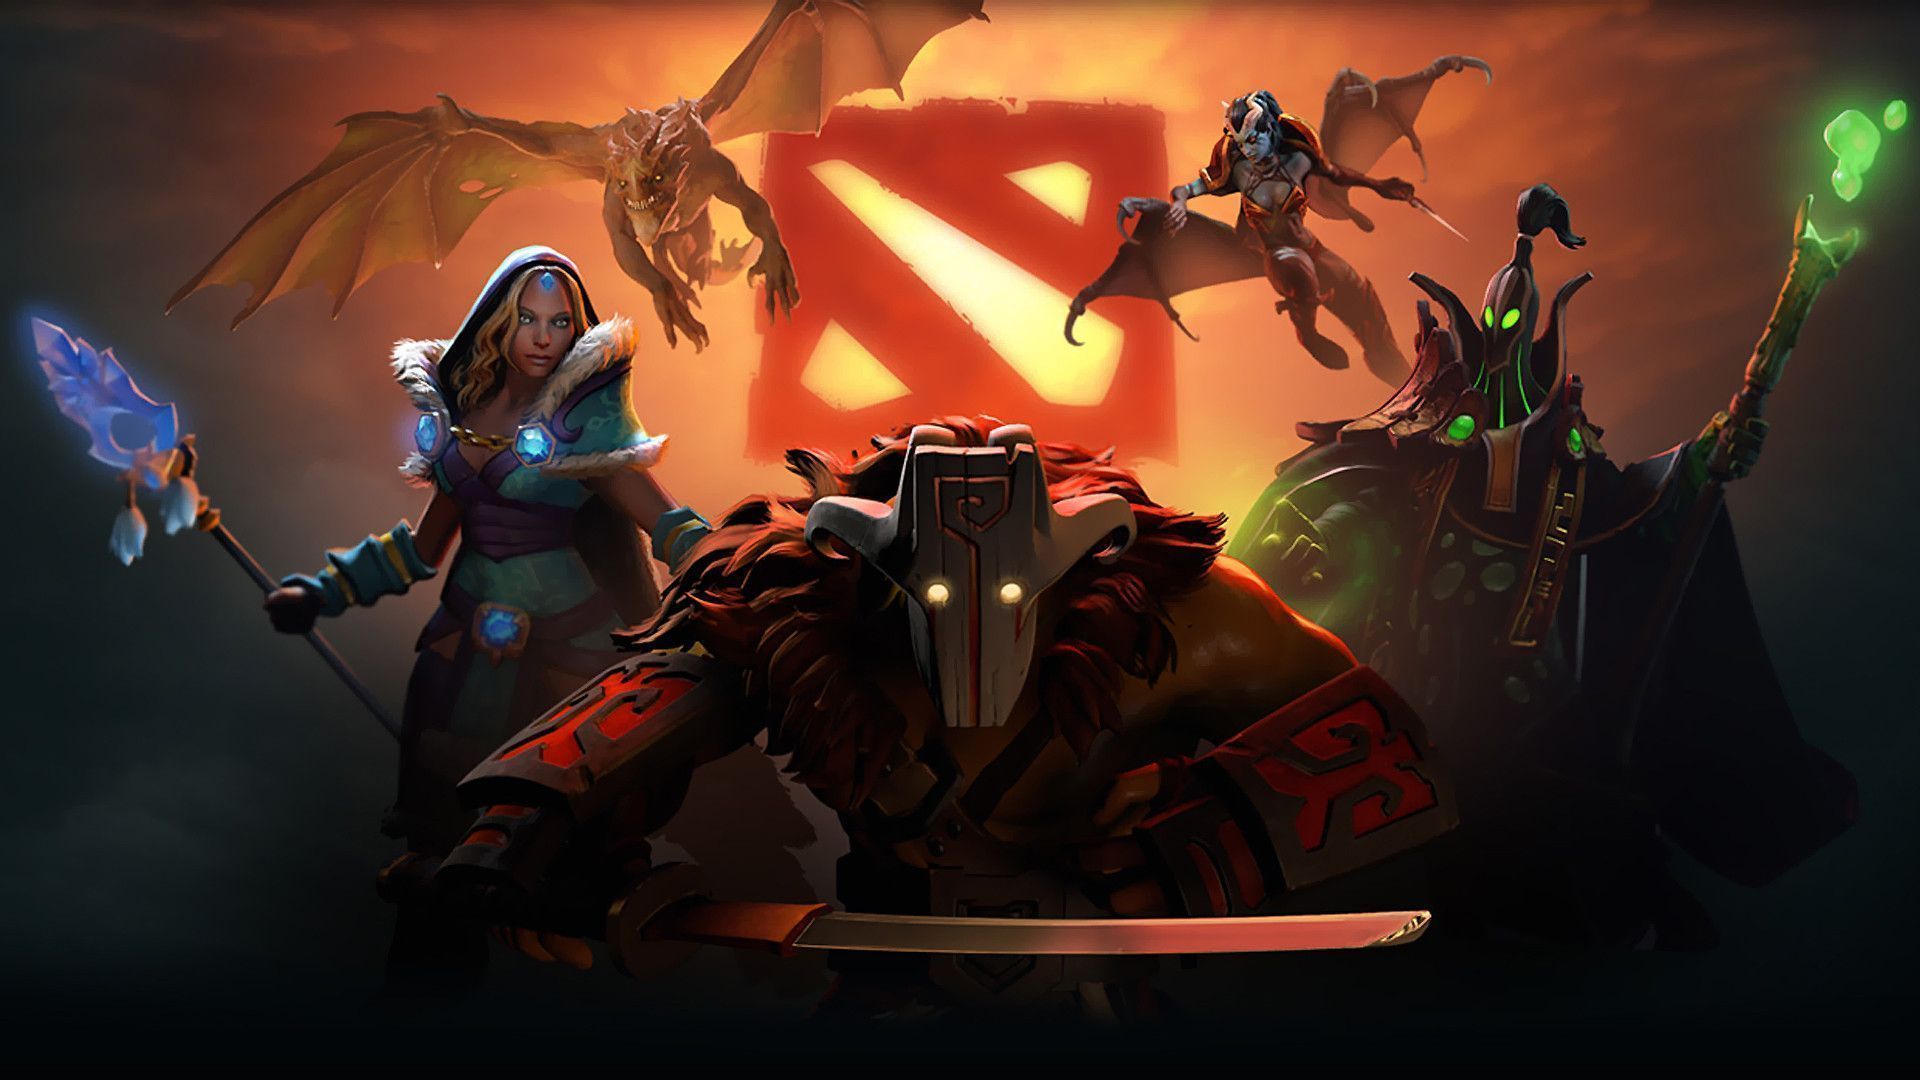 Dota 2 Update 7.29 has brought in a new hero called Dawnbreaker and major  map changes - Gamesear